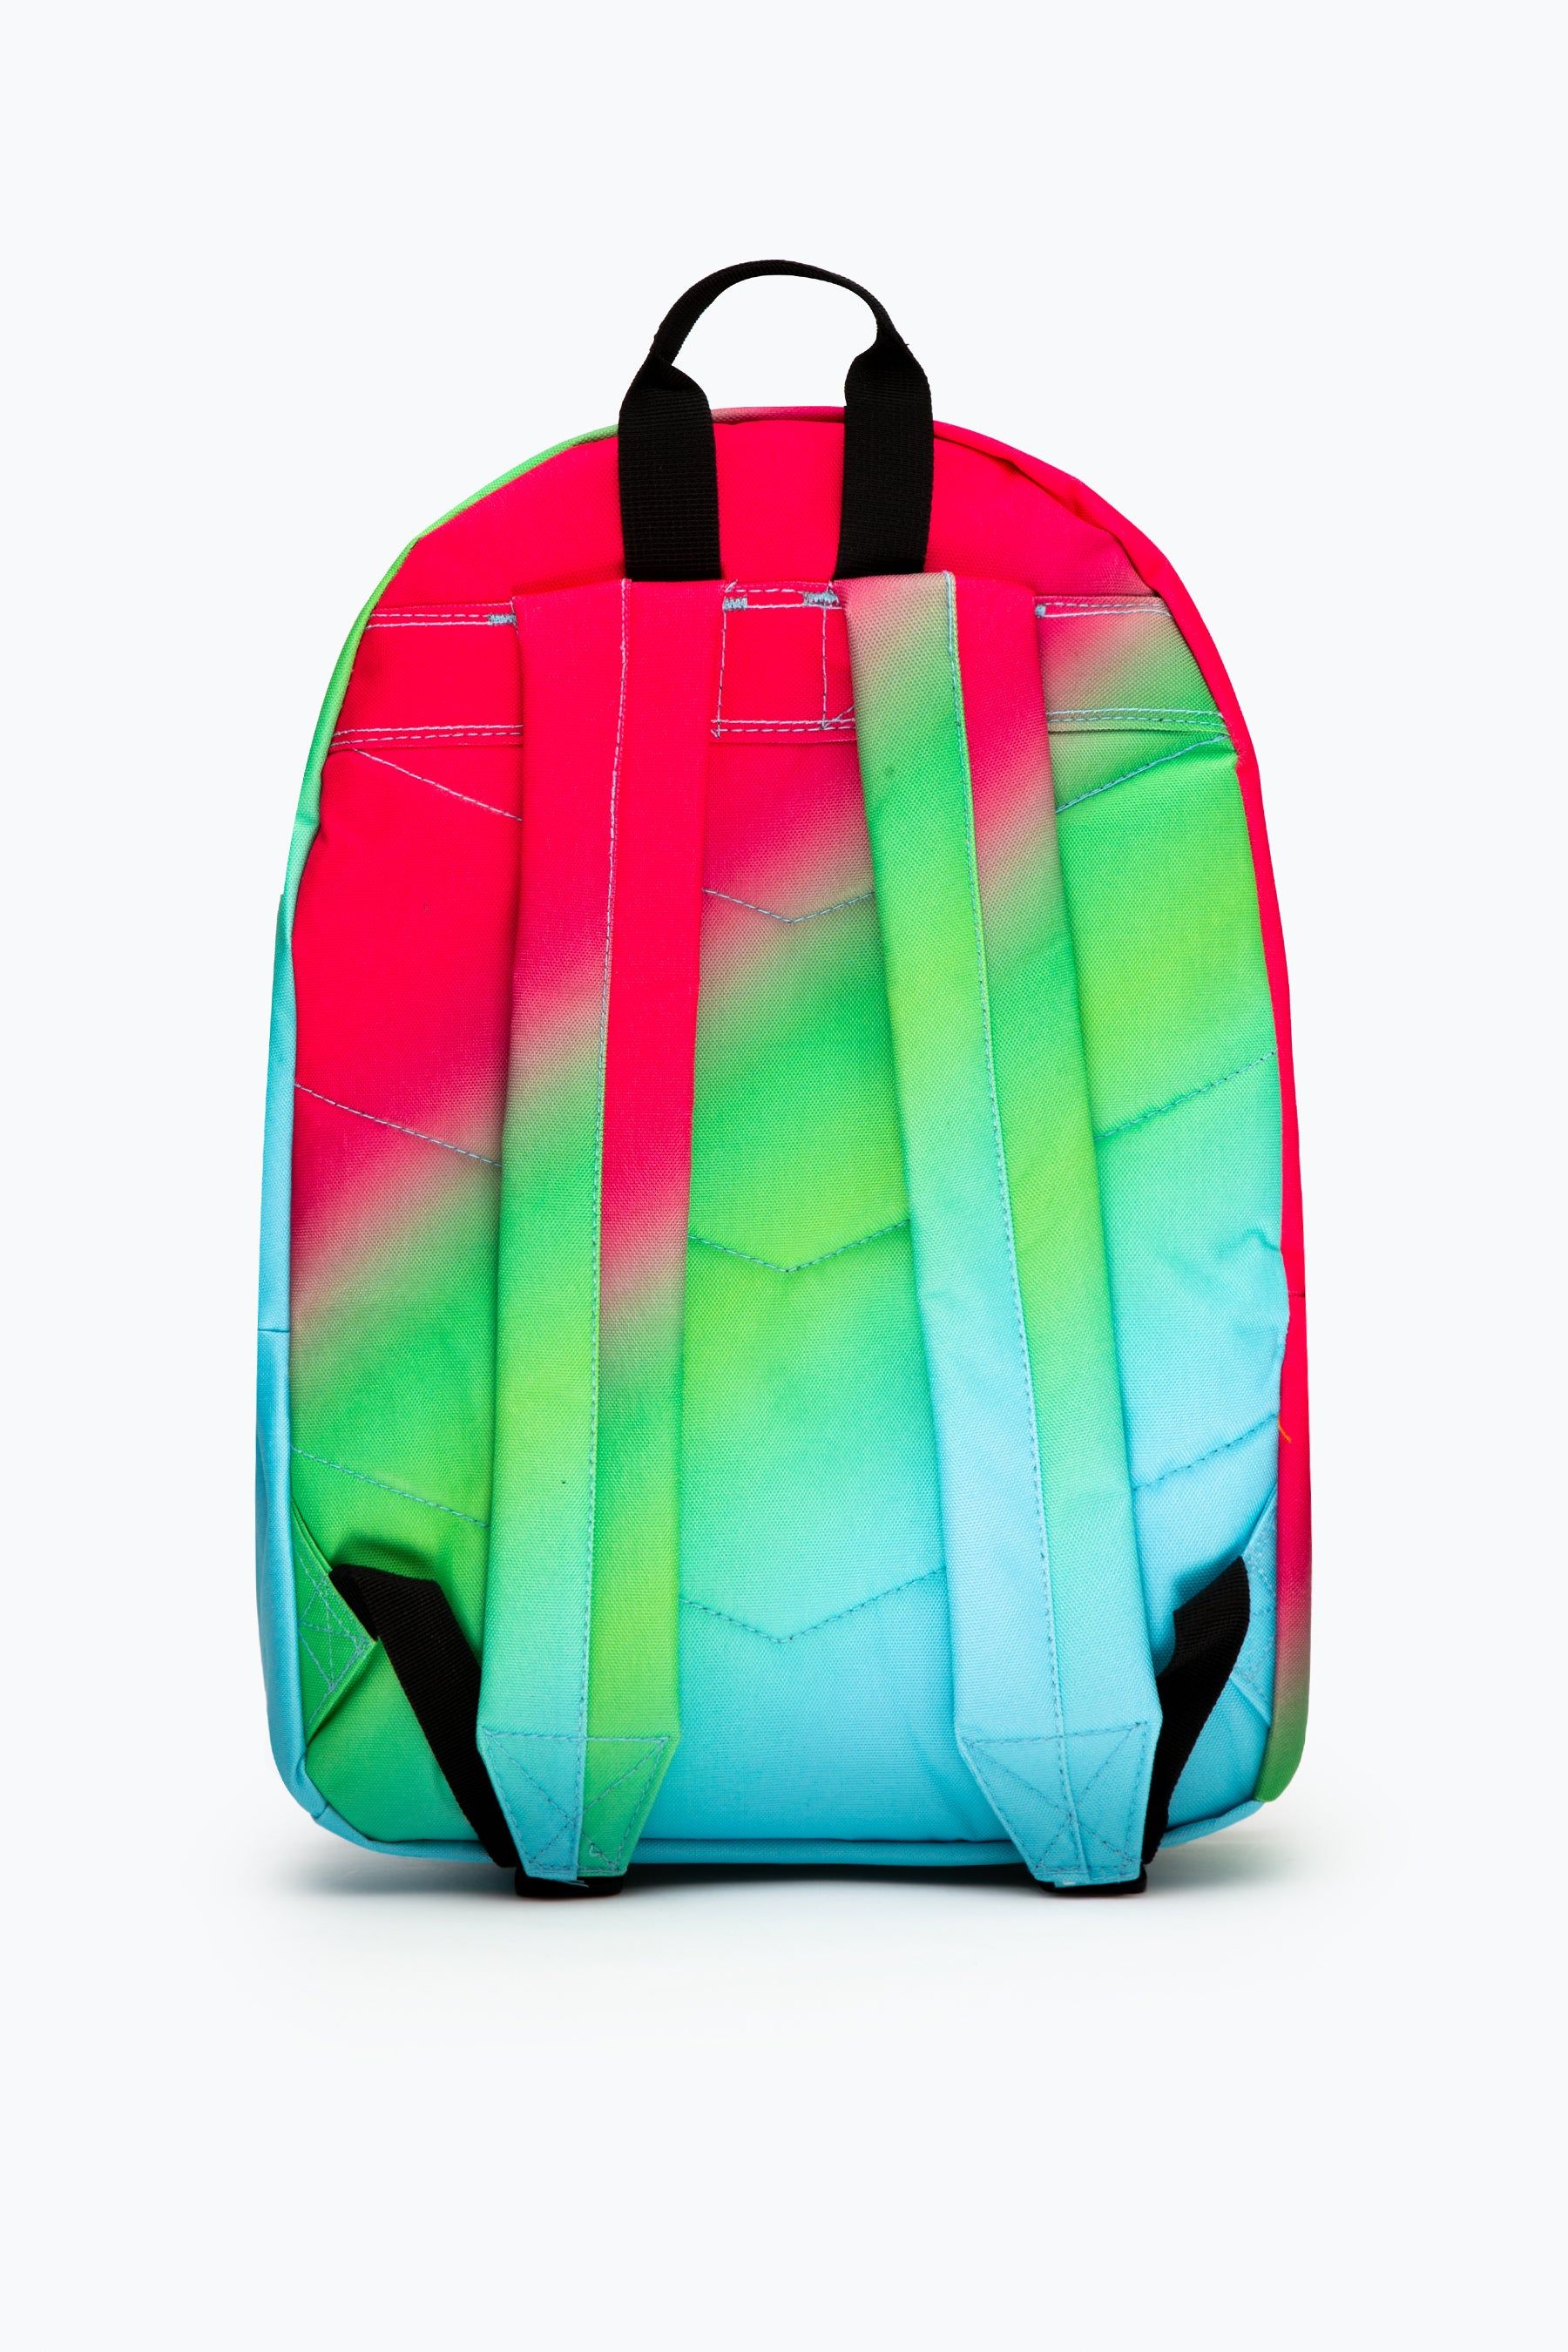 The perfect backpack does exist, and you're looking right at it. The HYPE. blue fade backpack is designed in our signature fade print in a pink, blue and green colour palette. With the iconic HYPE. crest badge, front pocket and embossed zip pullers. This backpack measures at 42 cms x 30 cms x 12cms, creating the perfect size to transport your goods from home to school and school to home. The straps offer supreme comfort with just the right amount of padding you need from your new backpack. Wipe clean only.